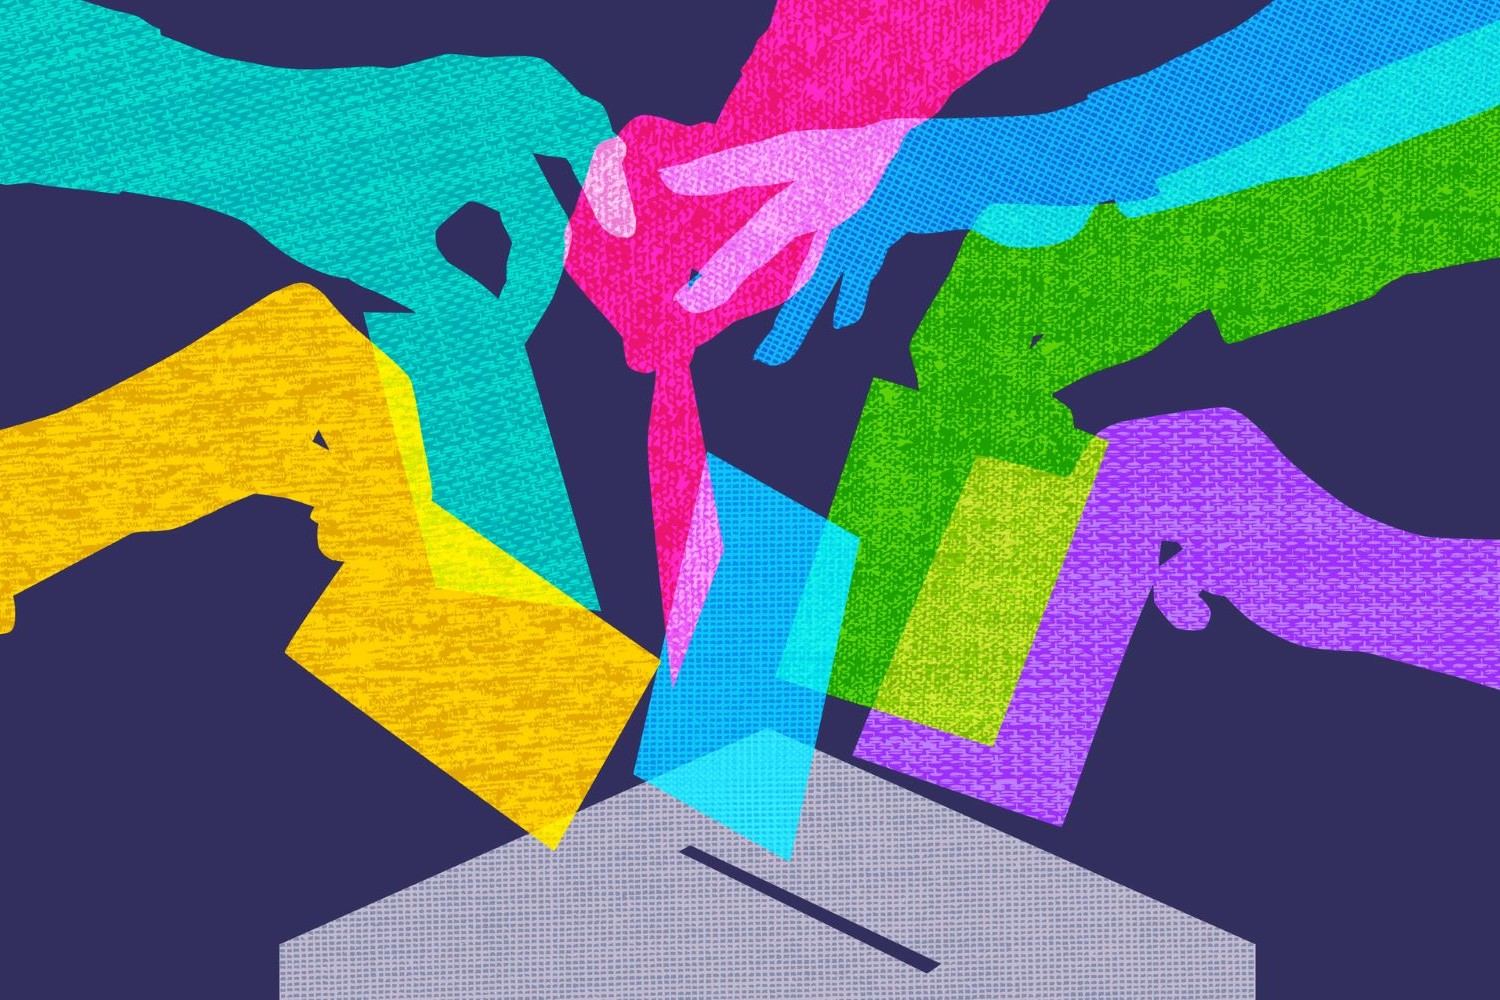 Colourful overlapping silhouettes of hands voting in fabric texture